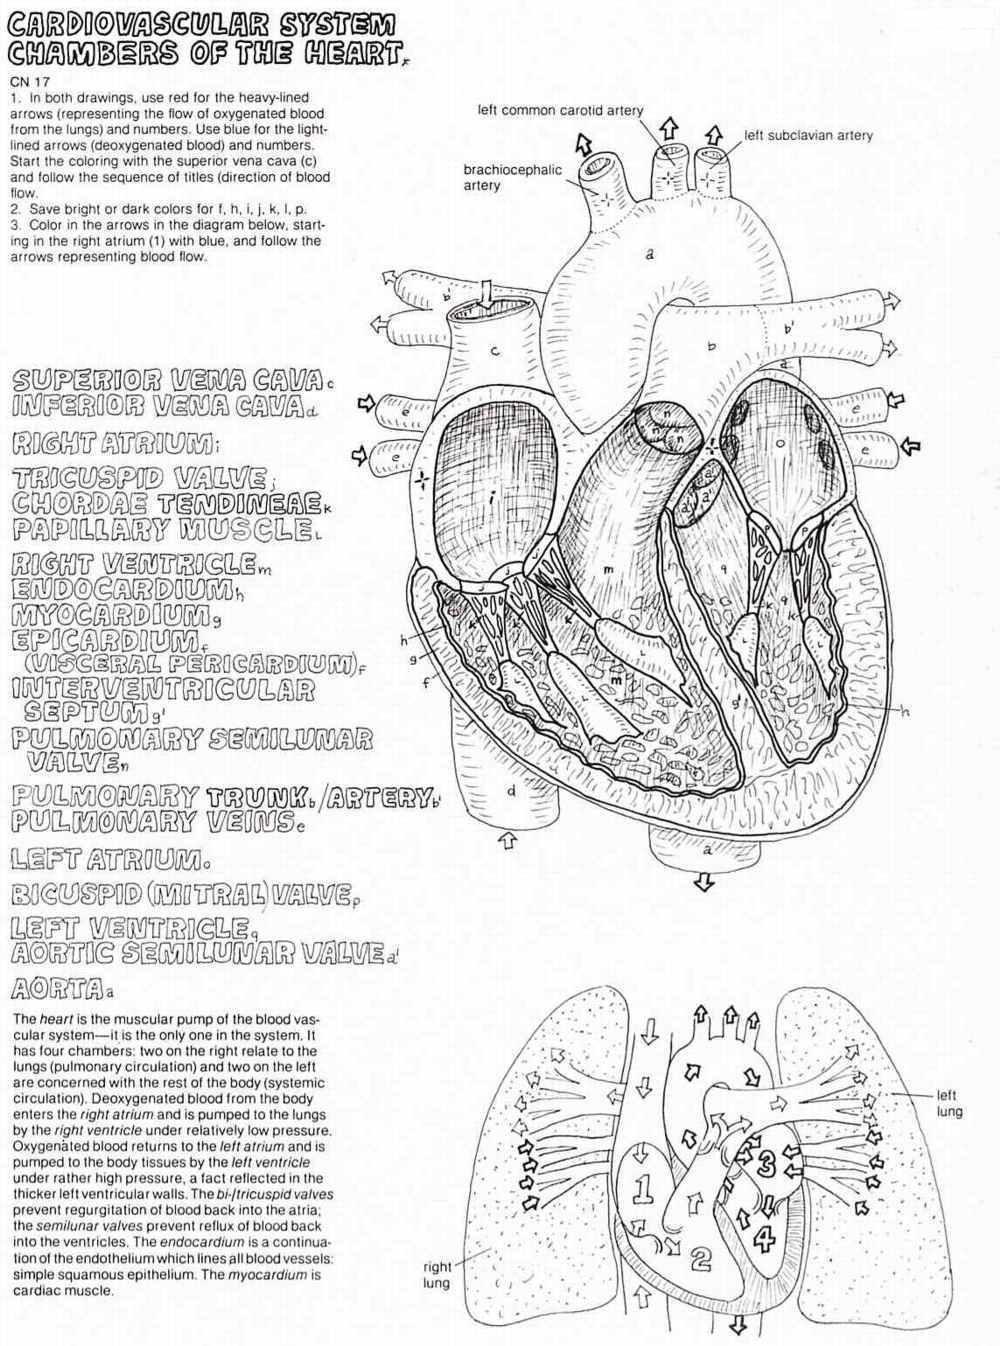 Cardiovascular System Chambers of the Heart Plate 50 Image